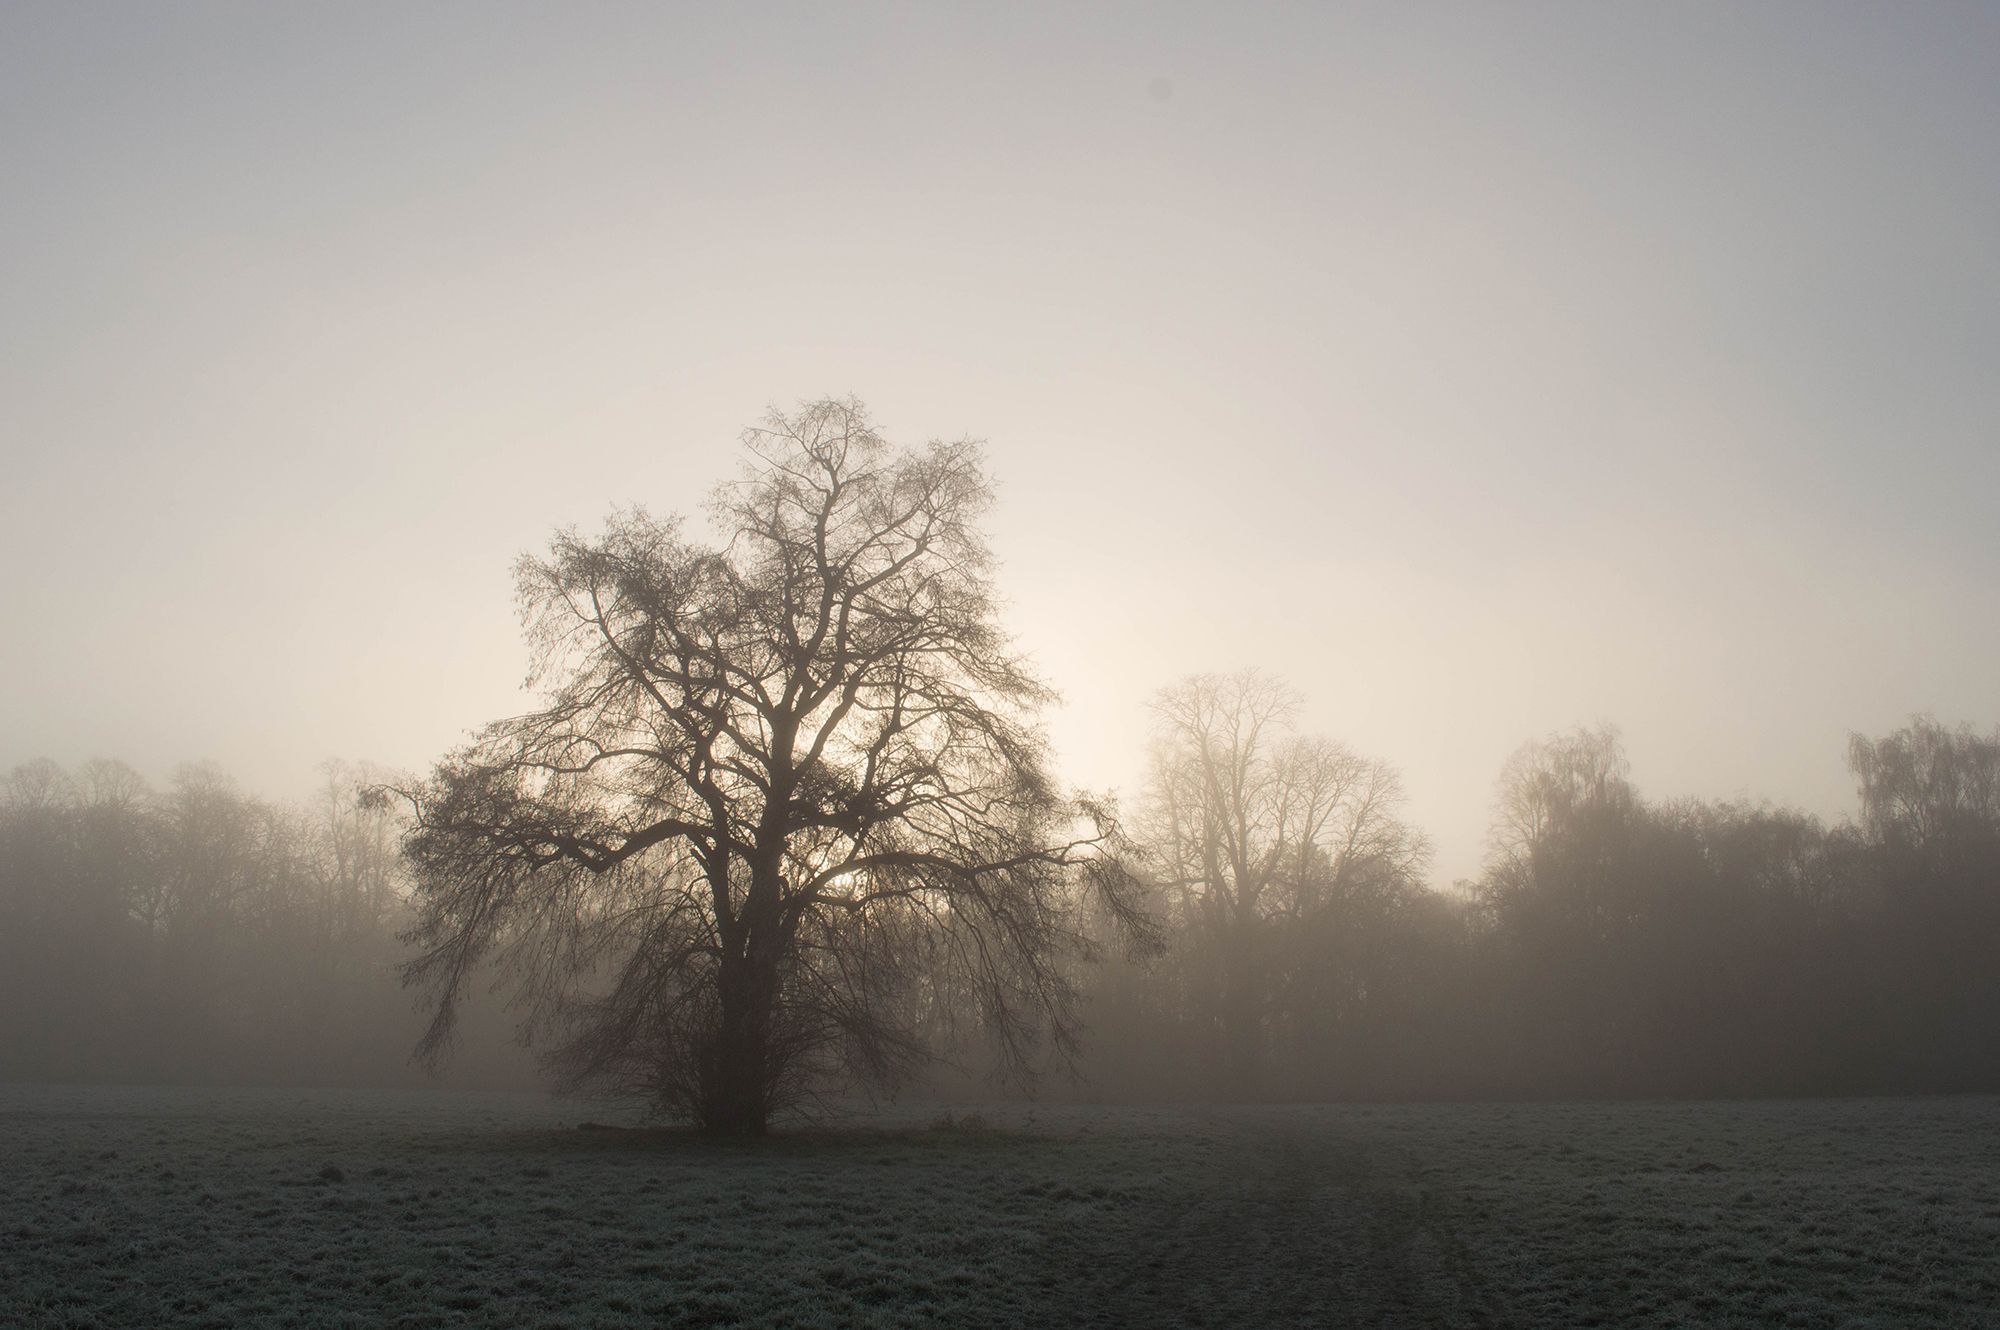 Misty Nonsuch Park